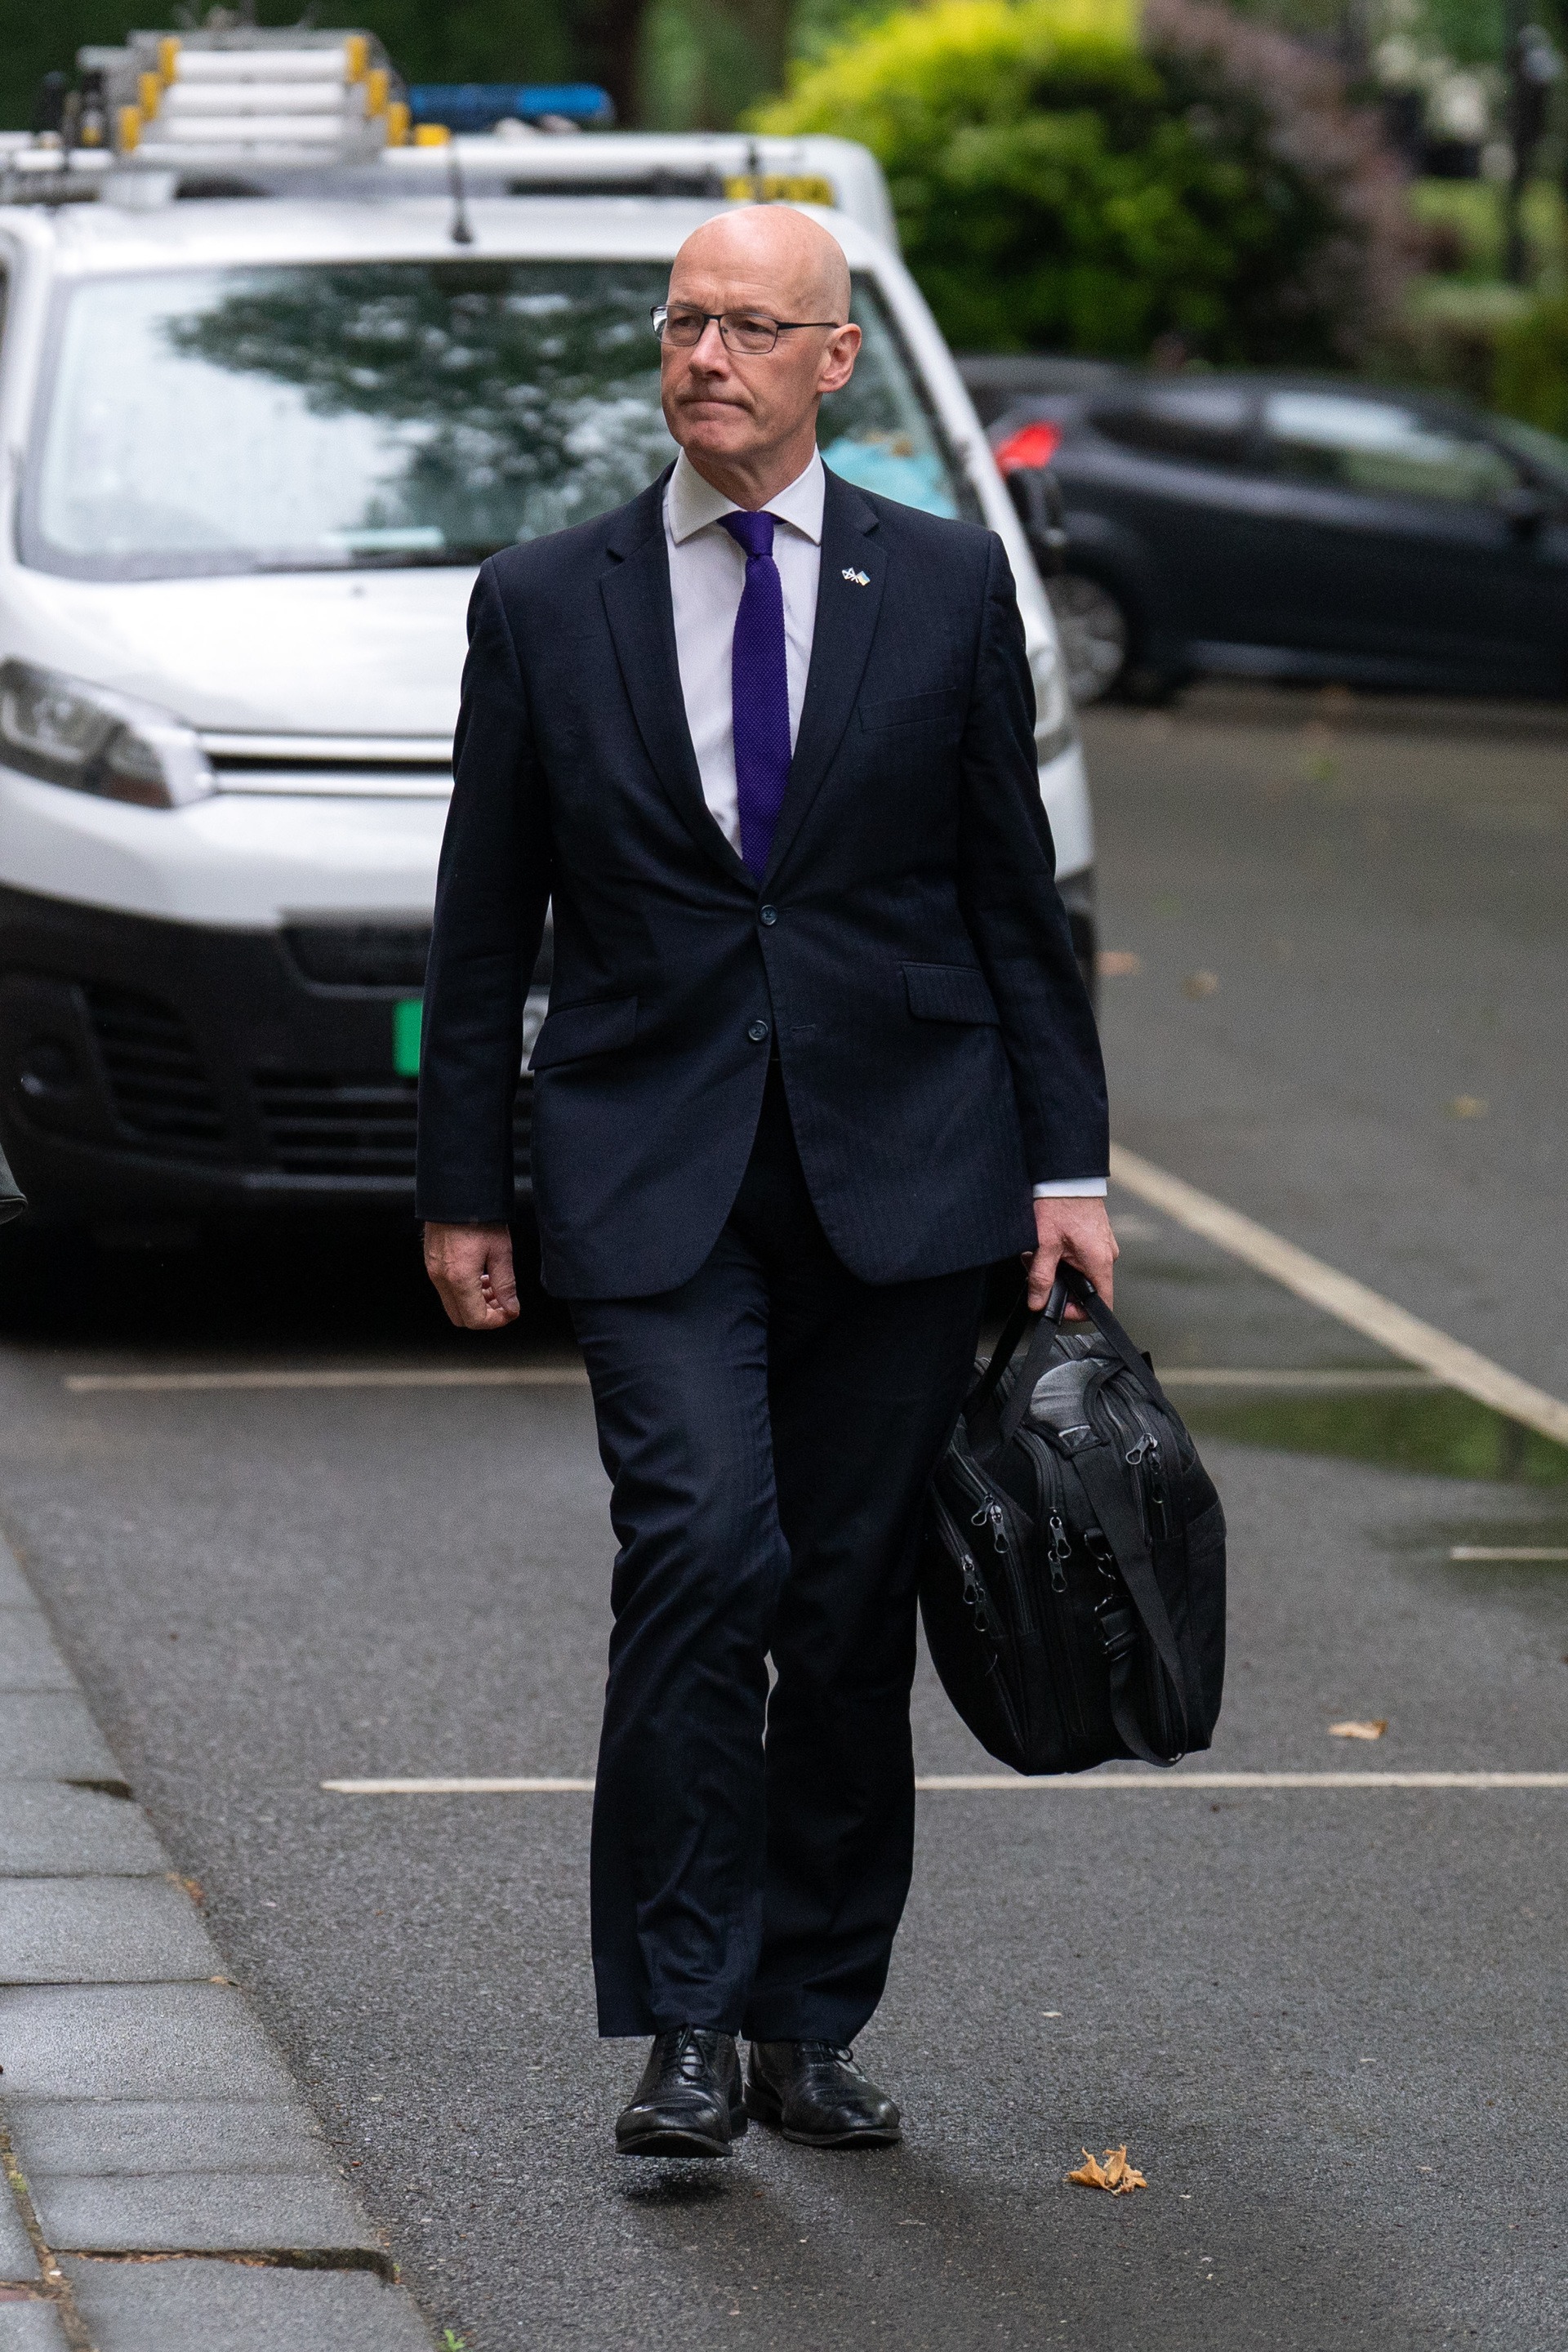 LONDON, ENGLAND - JUNE 29: Former Deputy Minister of Scotland, John Swinney, arrives to give evidence at the Covid-19 inquiry on June 29, 2023 in London, England. (Photo by Carl Court/Getty Images)